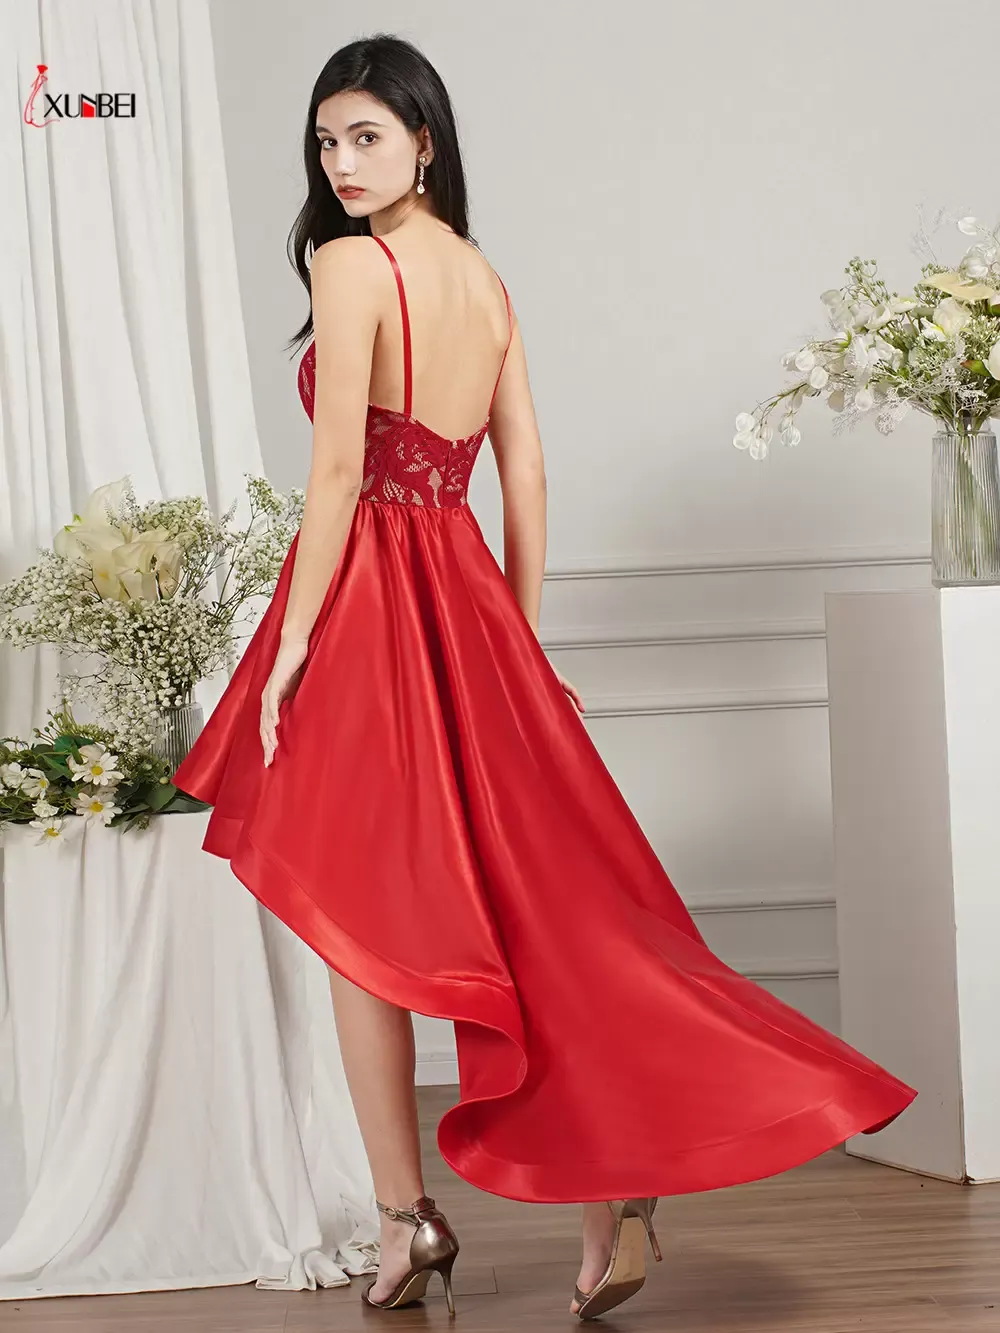 Short Cocktail Dresses 2022 Spaghetti Straps Sweetheart Neck Formal Party Backless Prom Gowns Satin Robe Evening Dresses CPS3001 C0329